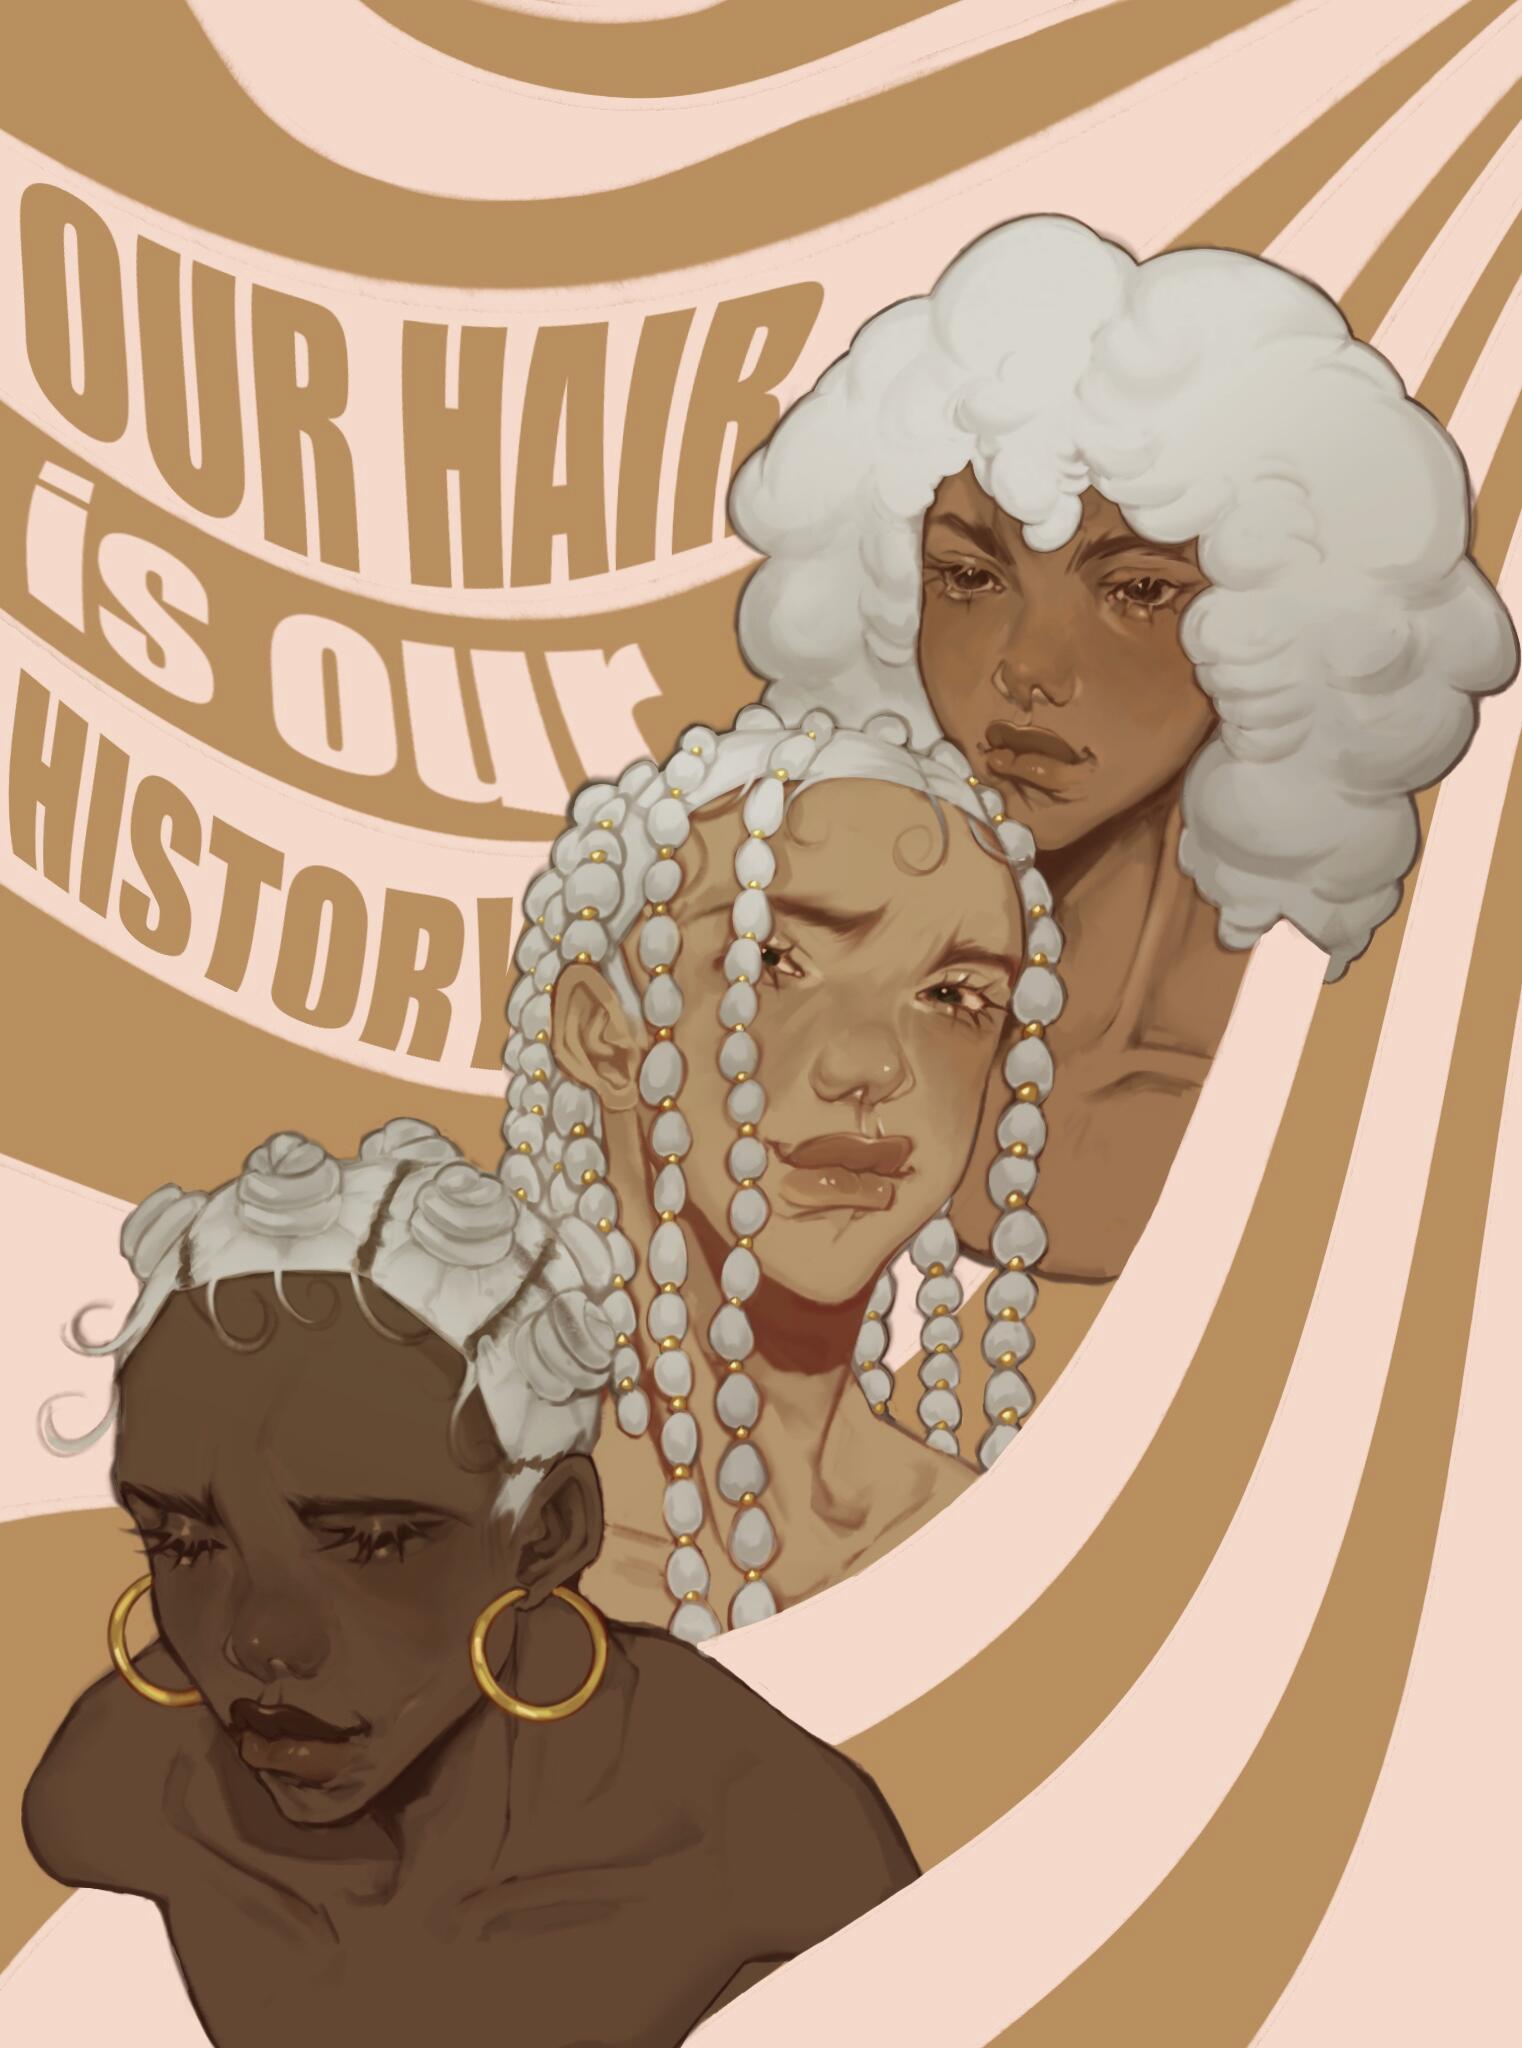 Our Hair Is Our History by Dylan '25